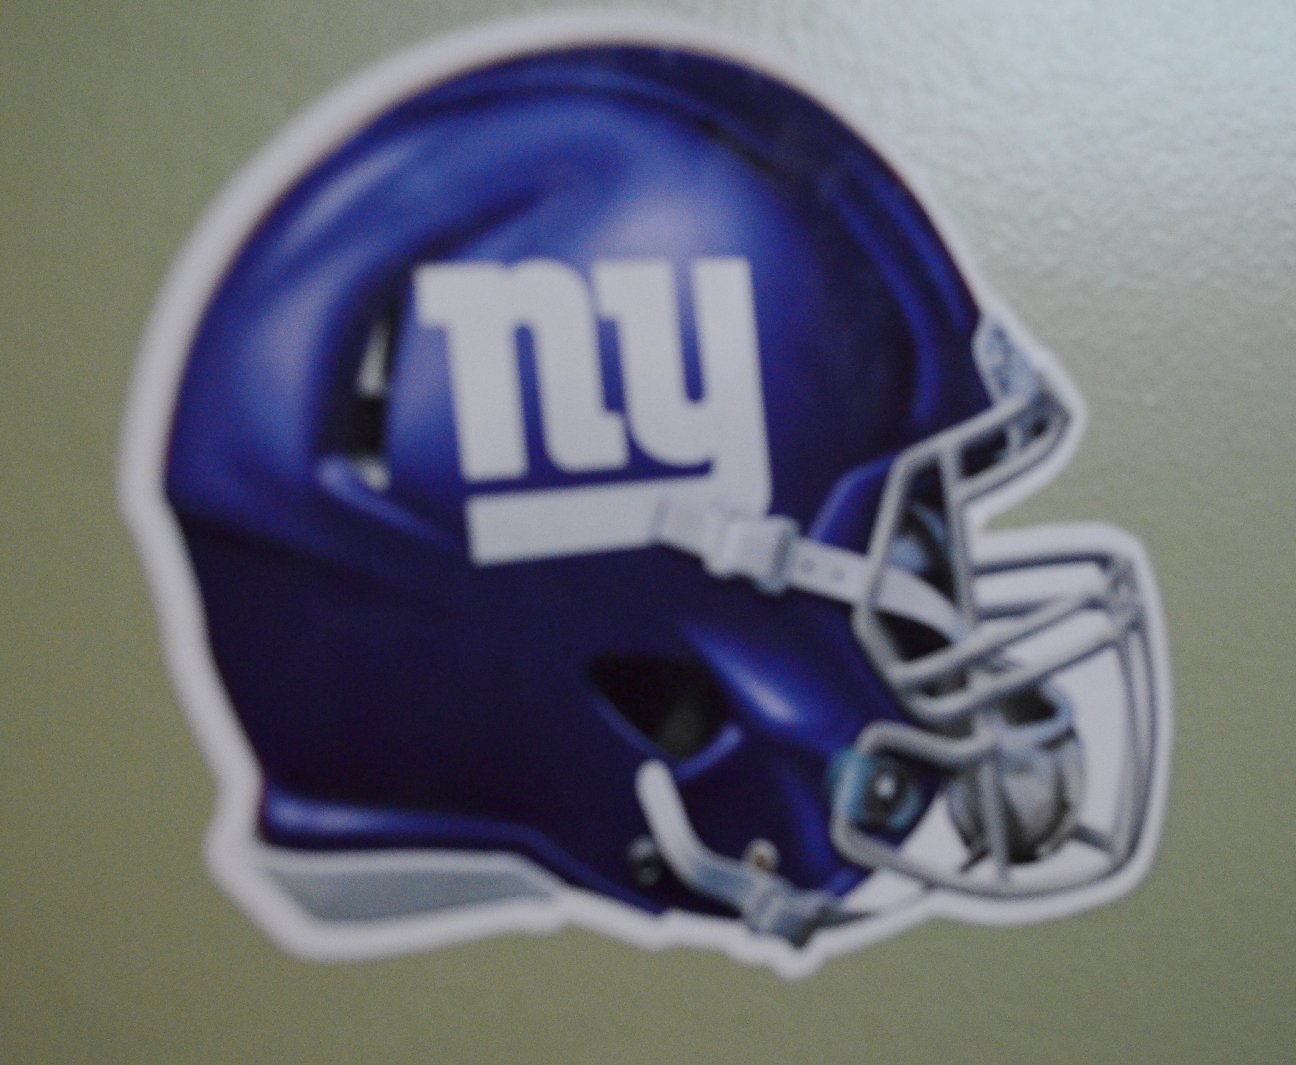 Official National Football League Fan Shop Licensed NFL Shop Multi-use Decals (New York Giants)